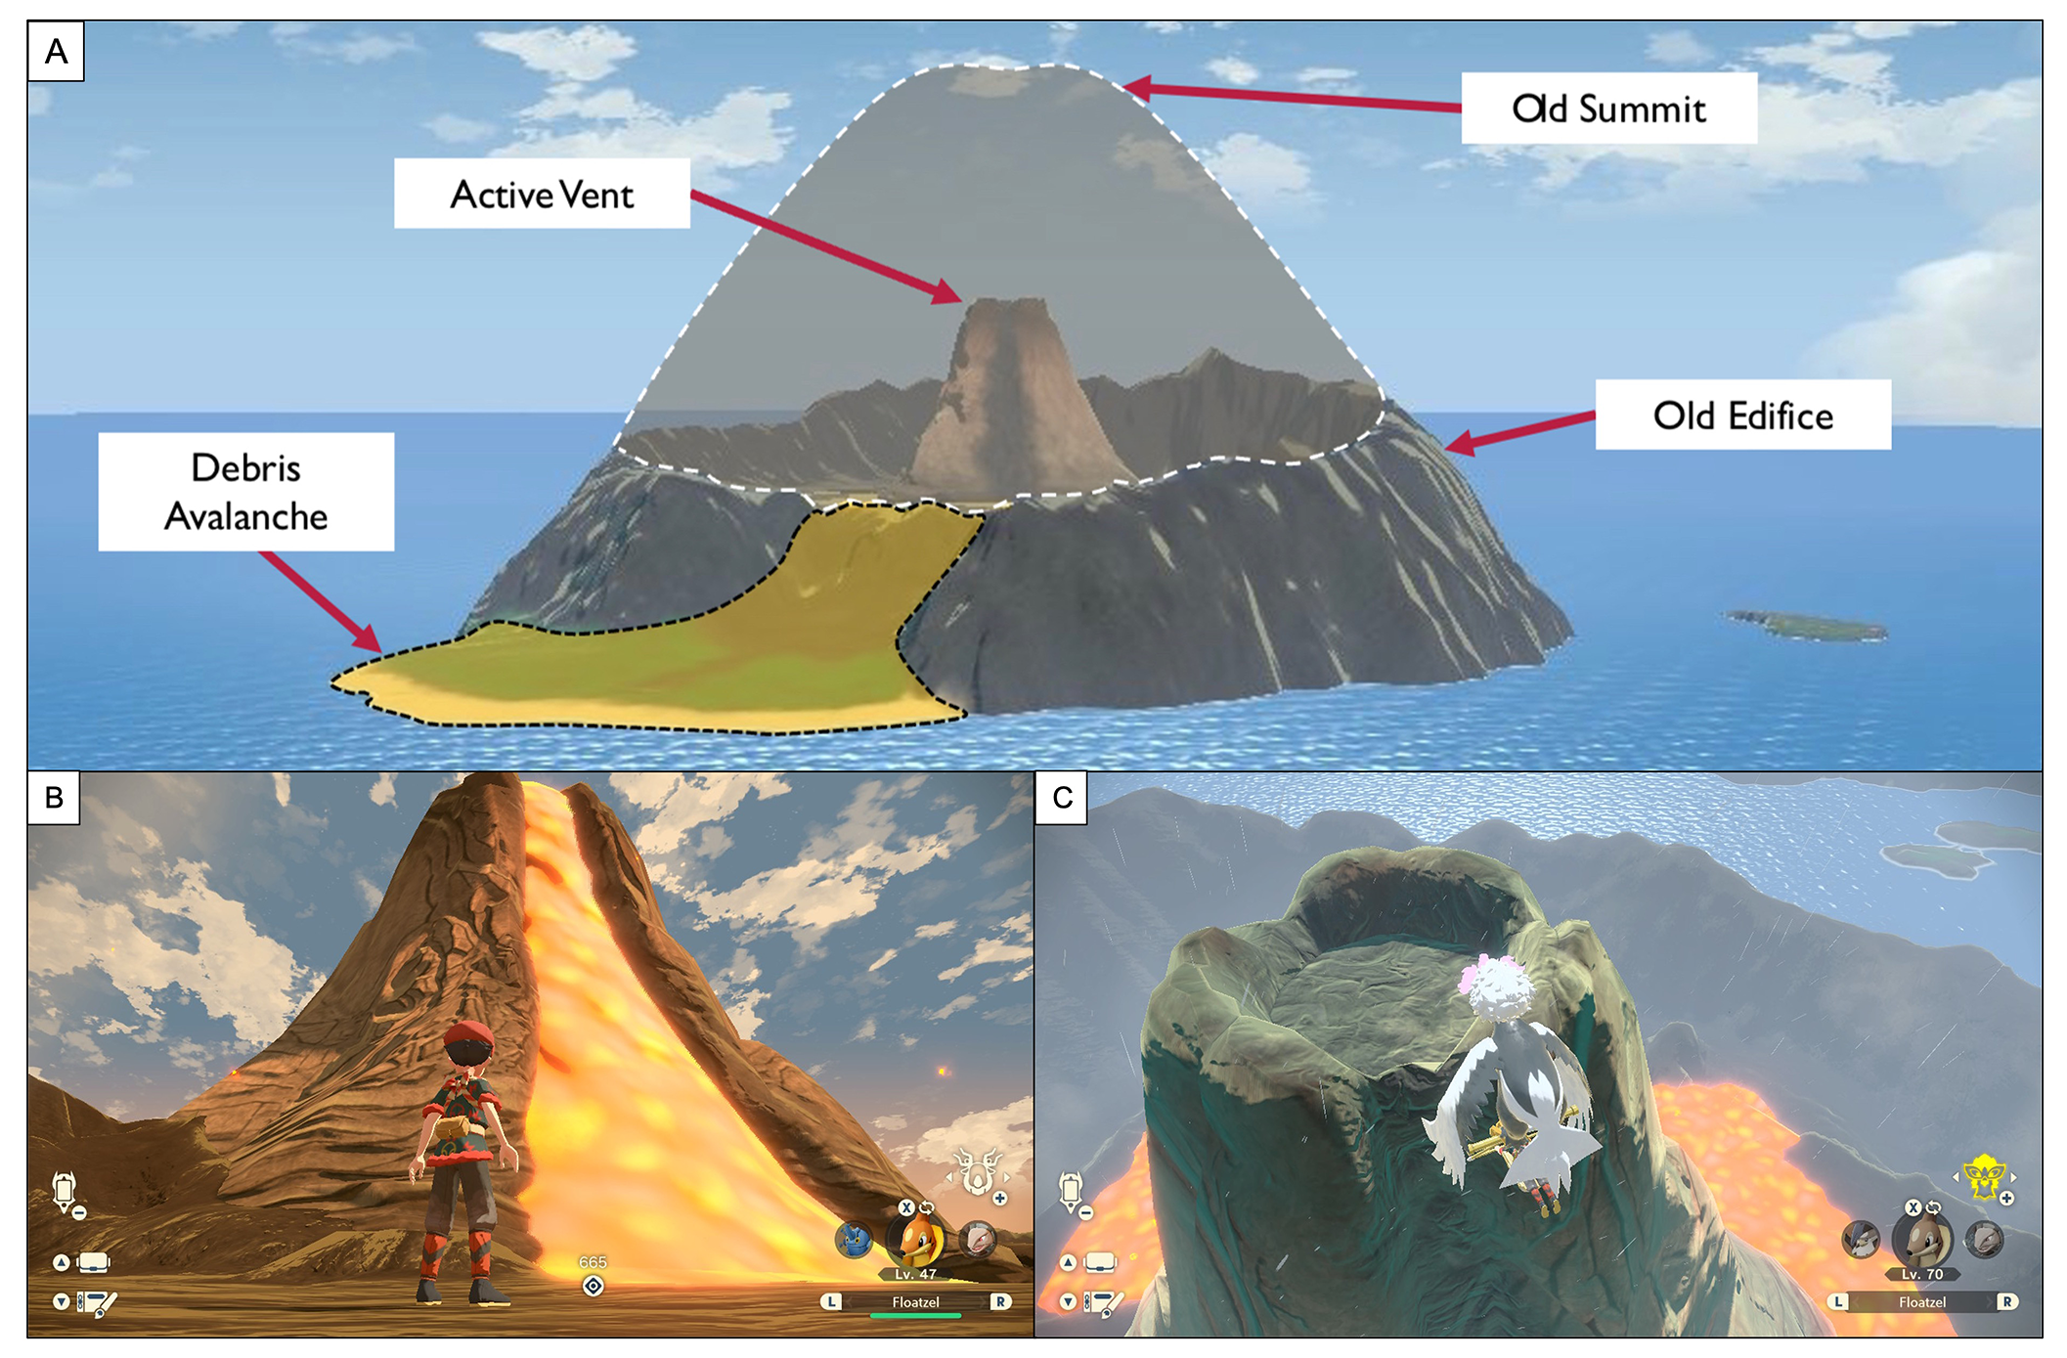 GC - The potential for using video games to teach geoscience